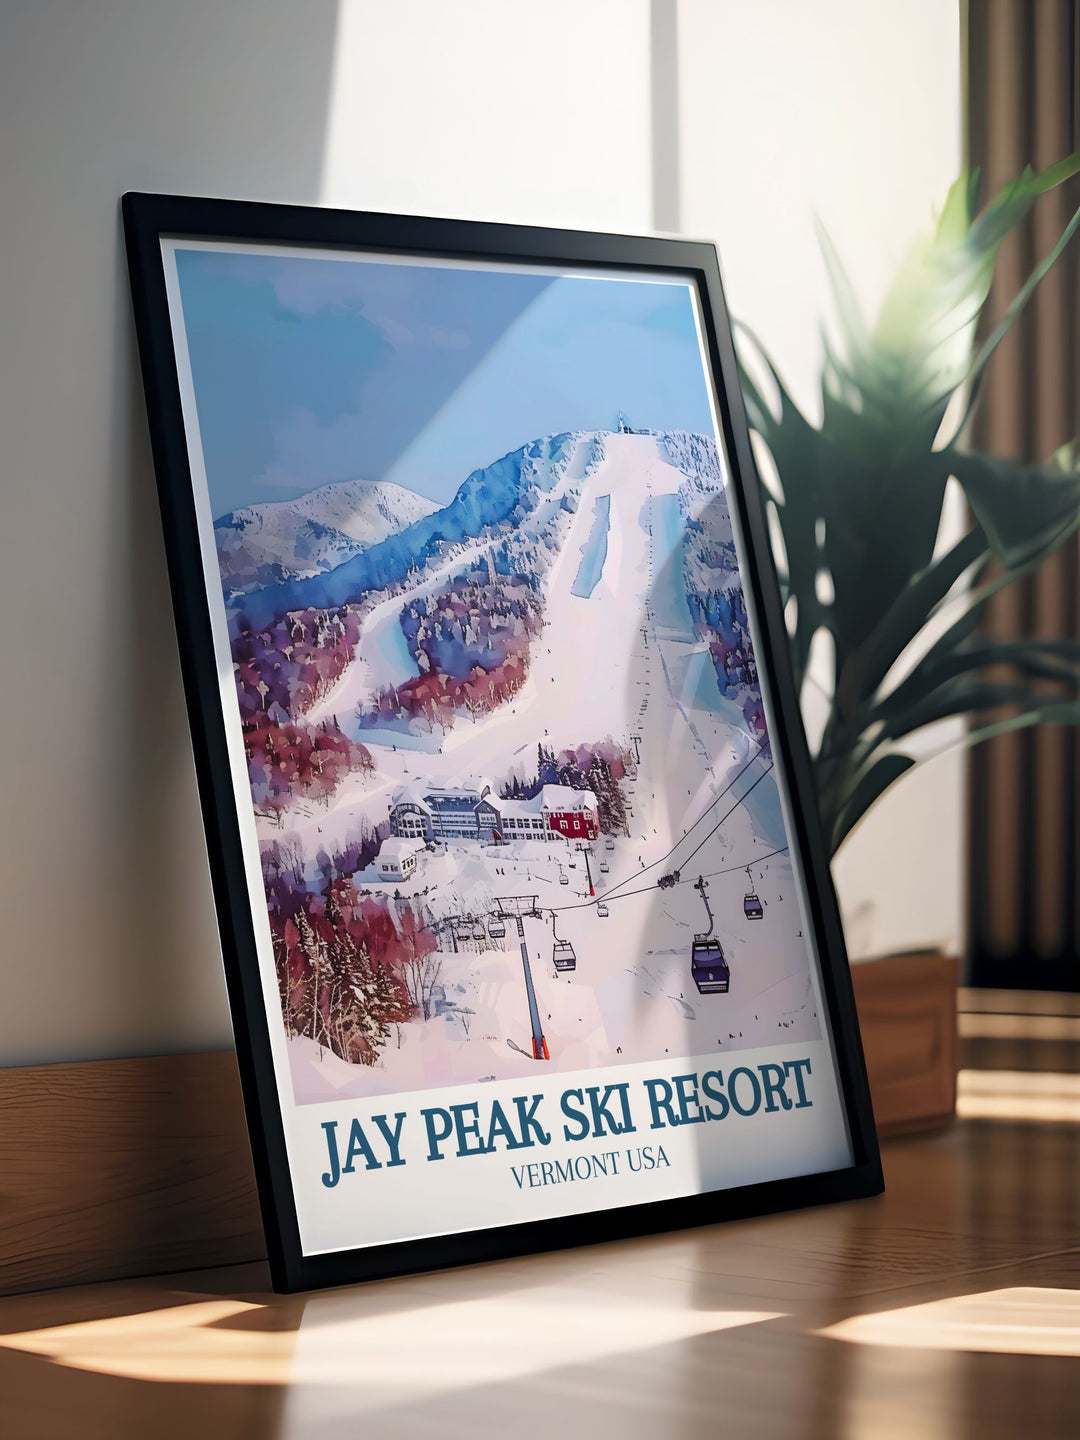 Captivating poster featuring Jay Peak Ski Resorts thrilling ski slopes and indoor water park, ideal for those who love winter sports and mountain adventures.